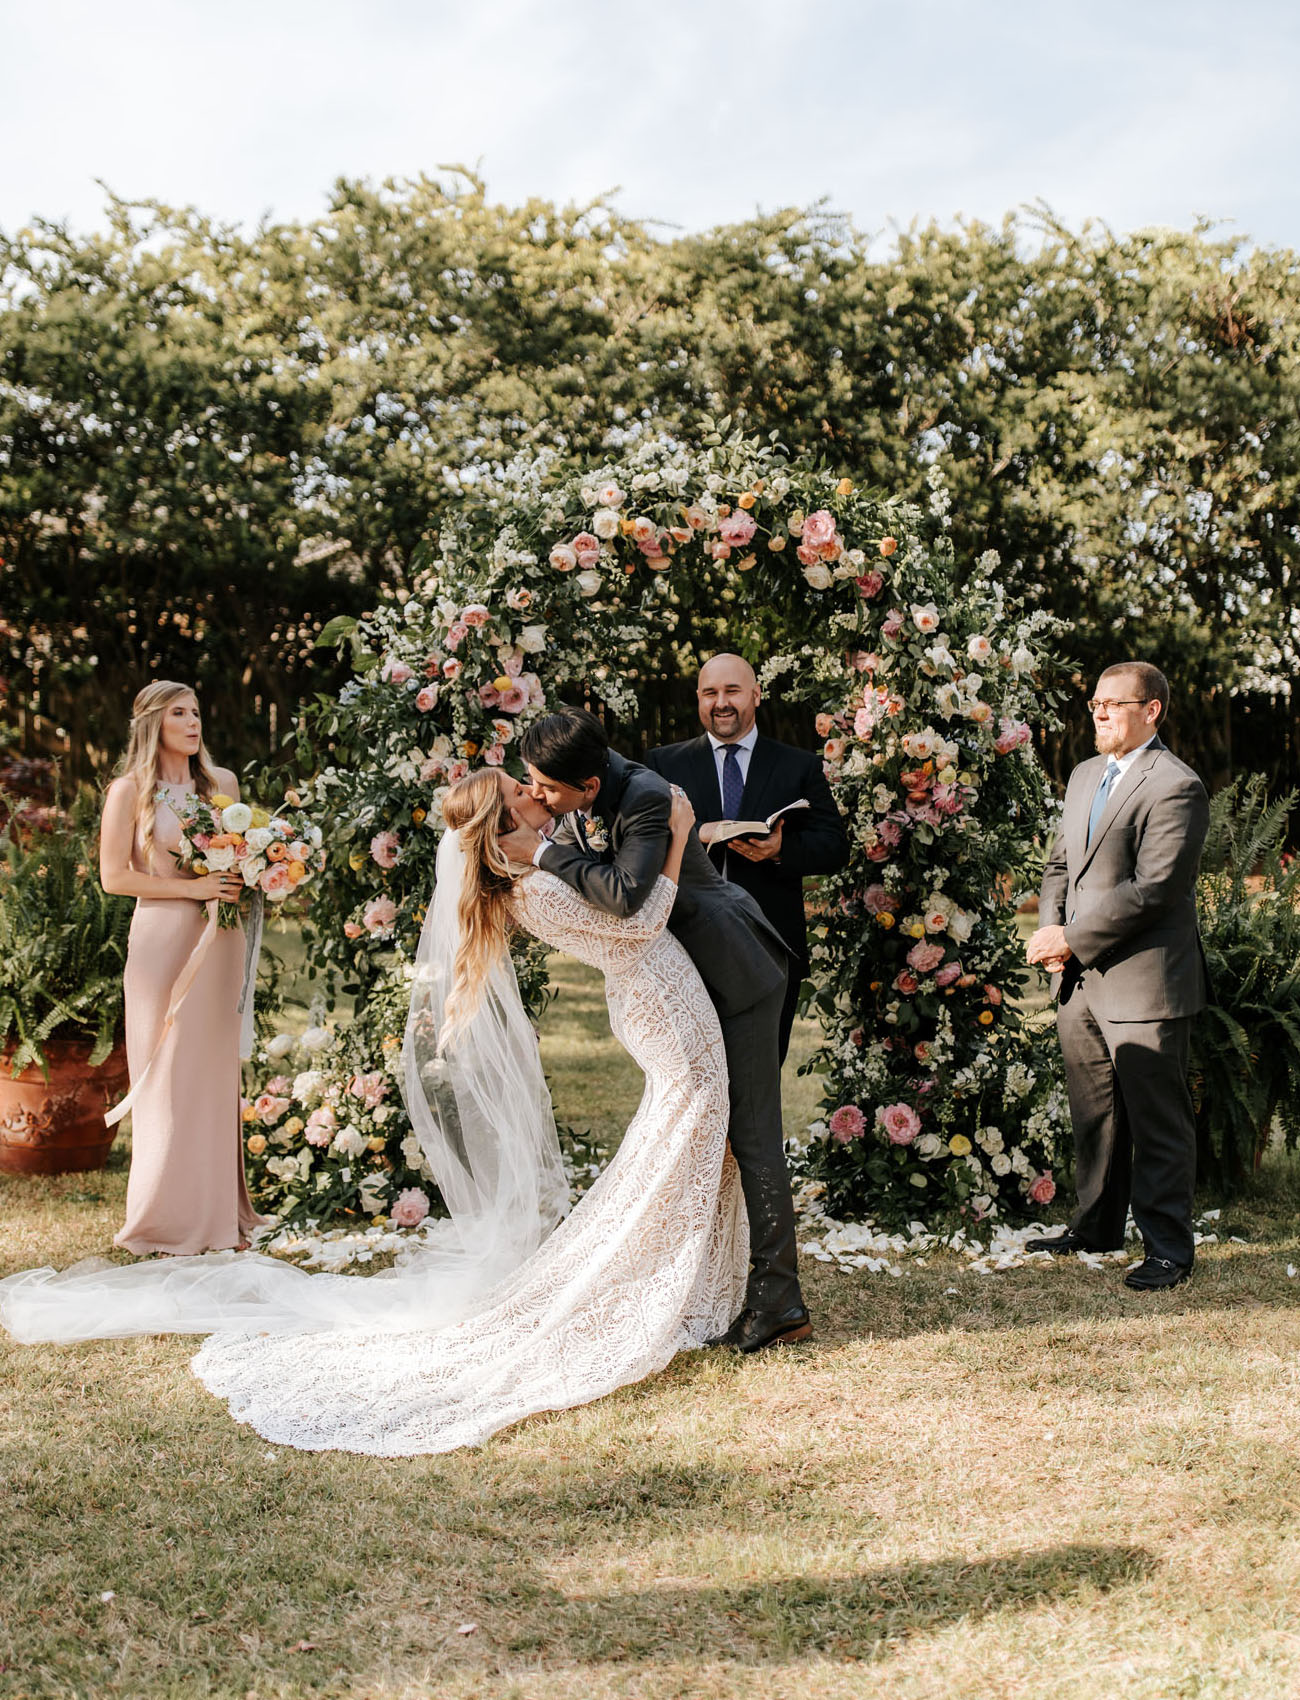 A Floral Filled Backyard Wedding Ceremony In The Midst Of Covid 19 Green Wedding Shoes